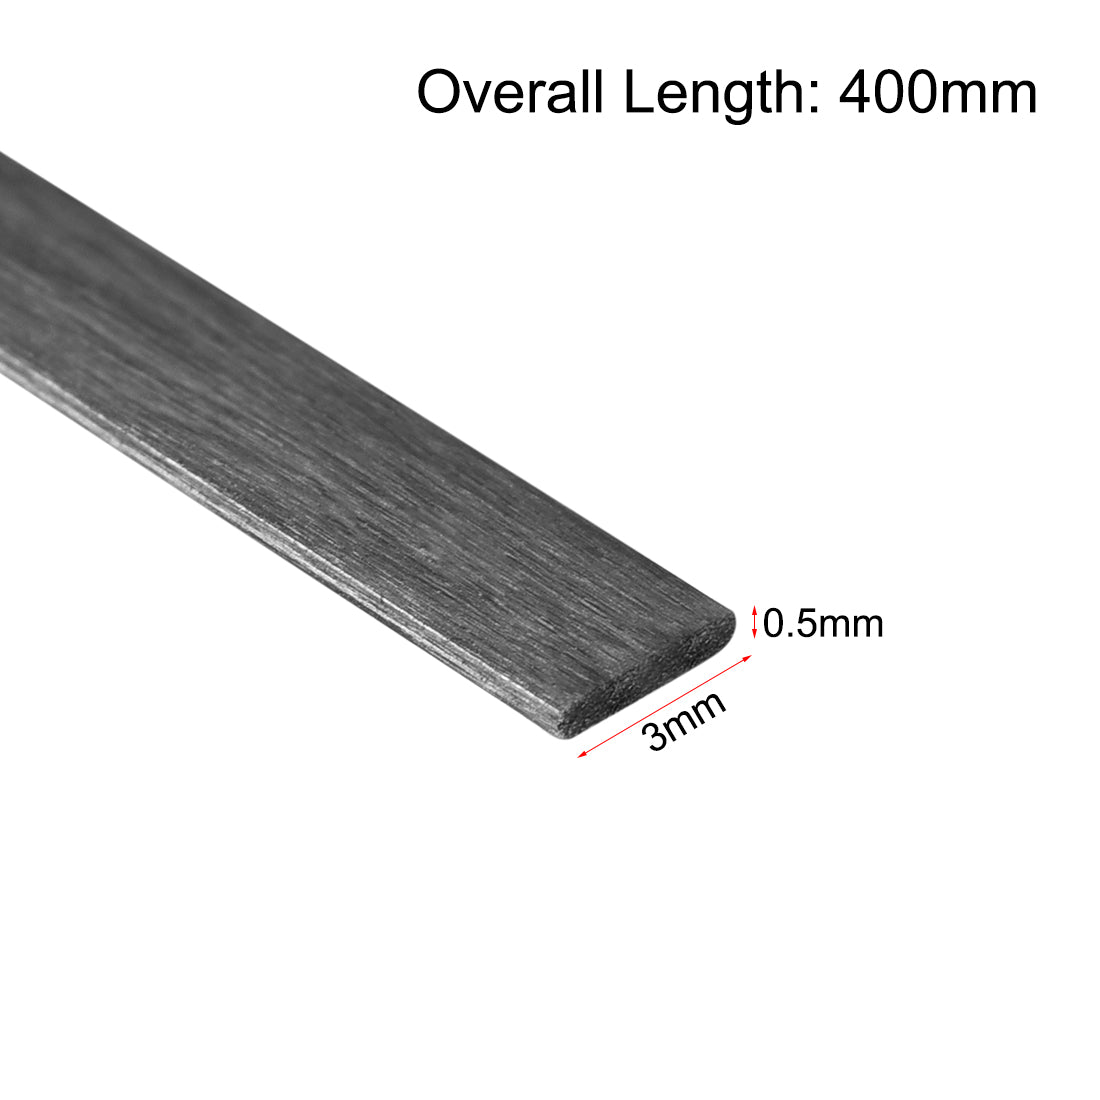 uxcell Uxcell Carbon Fiber Strip Bars 0.5x3mm 400mm Length Pultruded Carbon Fiber Strips for Kites, RC Airplane 2 Pcs